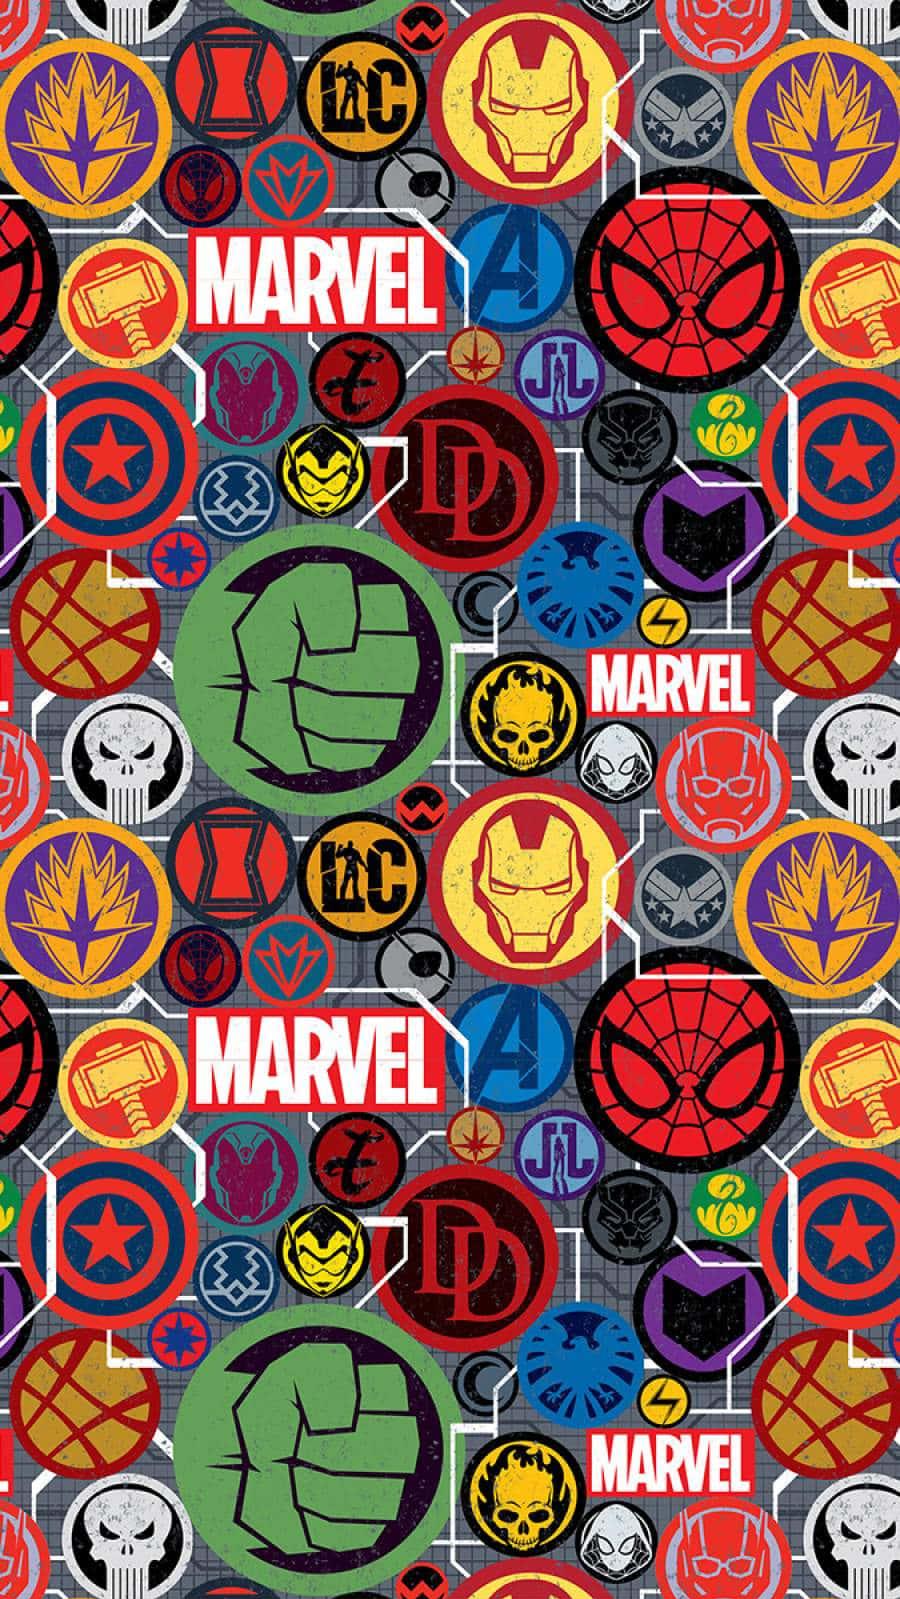 Download Marvel Art Iphone brings together the power and style of